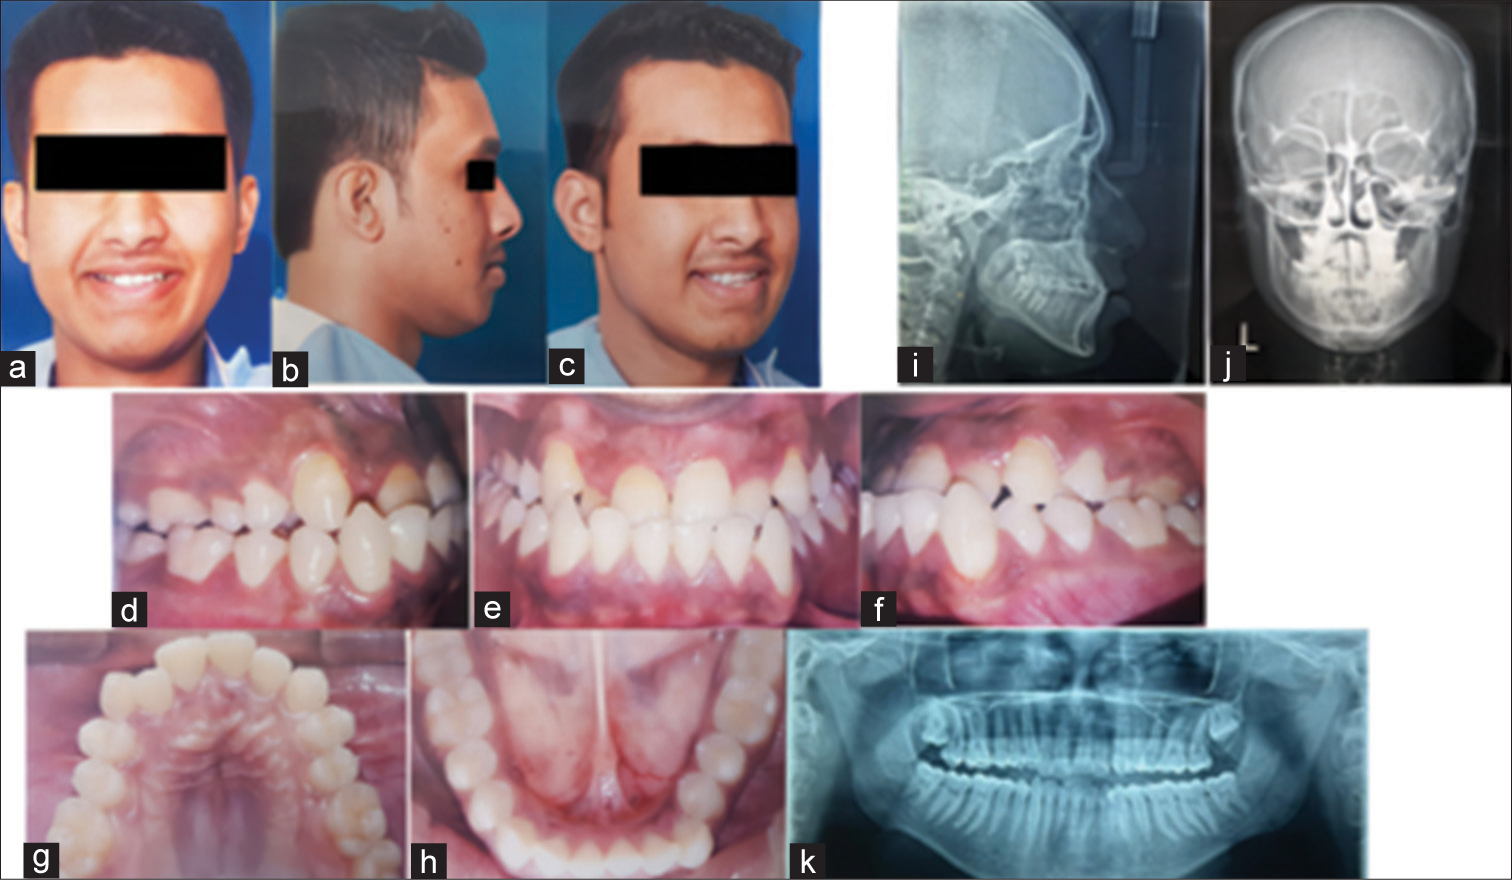 Treatment modalities for management of skeletal and dental Class III malocclusion – A case series